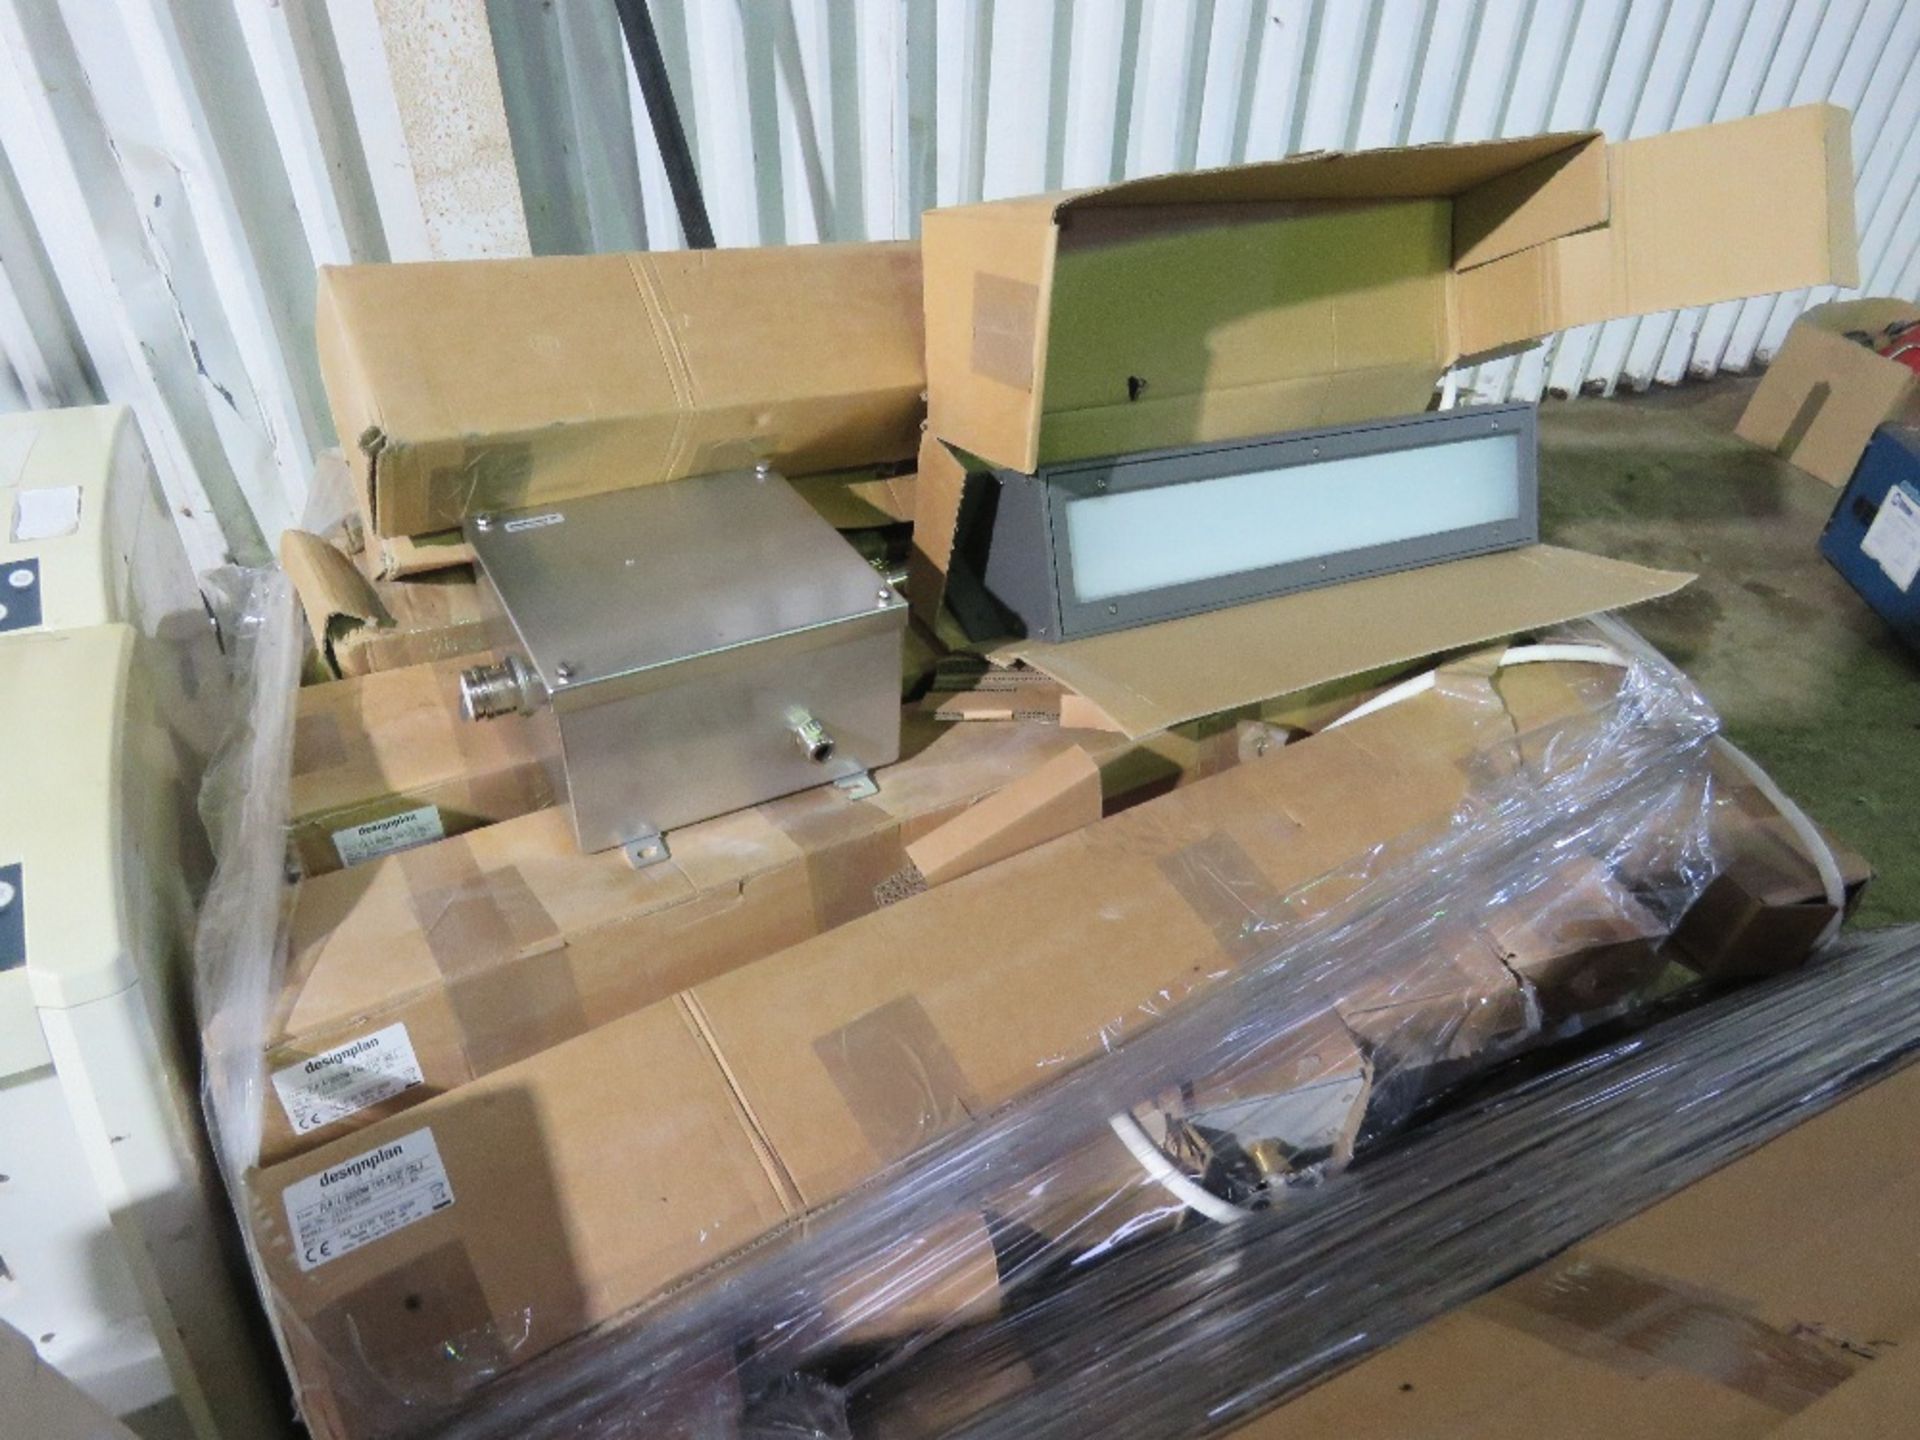 3X PALLETS OF WEIDMULLER INDUSTRIAL LIGHTING EQUIPMENT: 1X PALLET OF STEEL CONNECTION BOXES AND 2X - Image 2 of 9